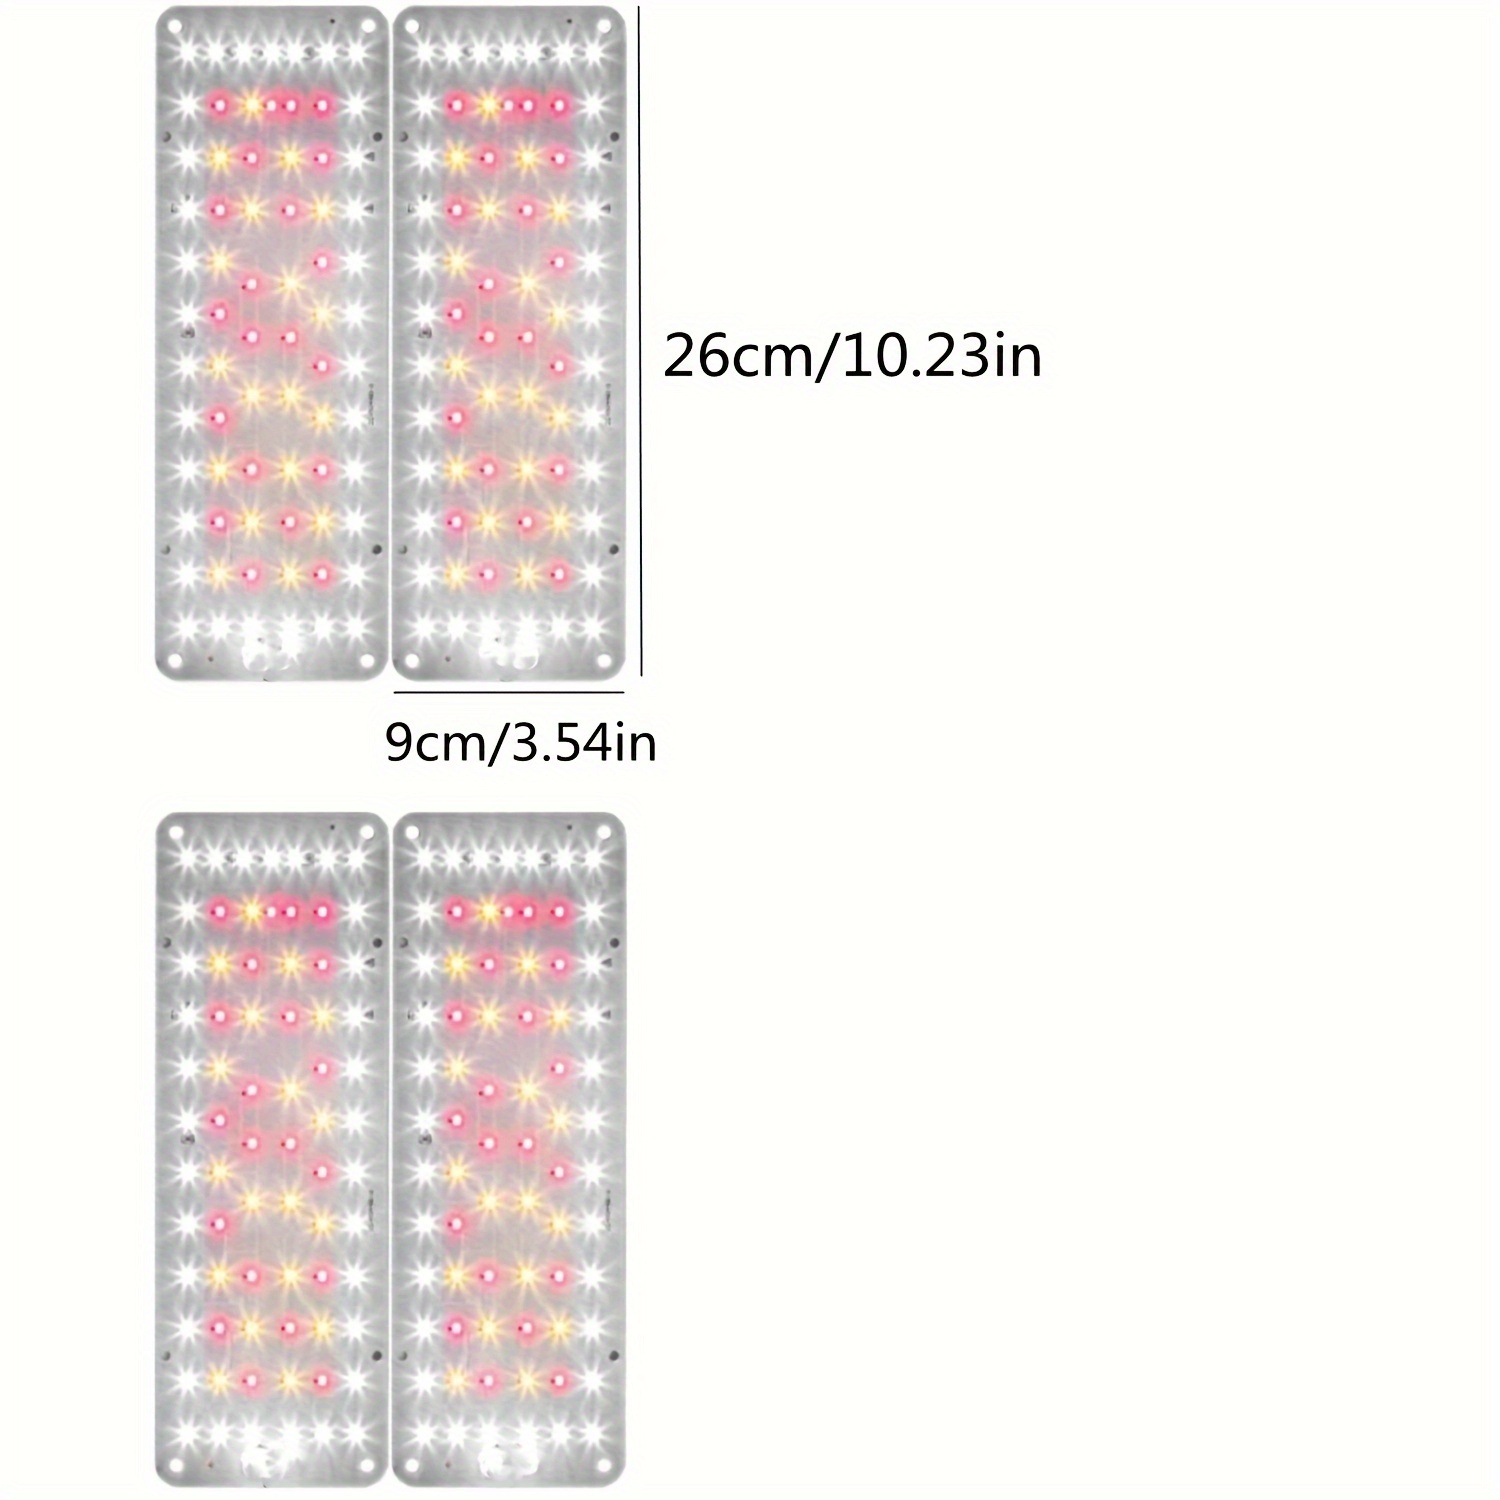 2 3 4pcs grow light full spectrum 50w 500w equiv led grow lights for indoor plants 6000k 3 spectrum modes dimmable timer durable aluminum ultra thin with 288 leds idea for seedlings greenhouse